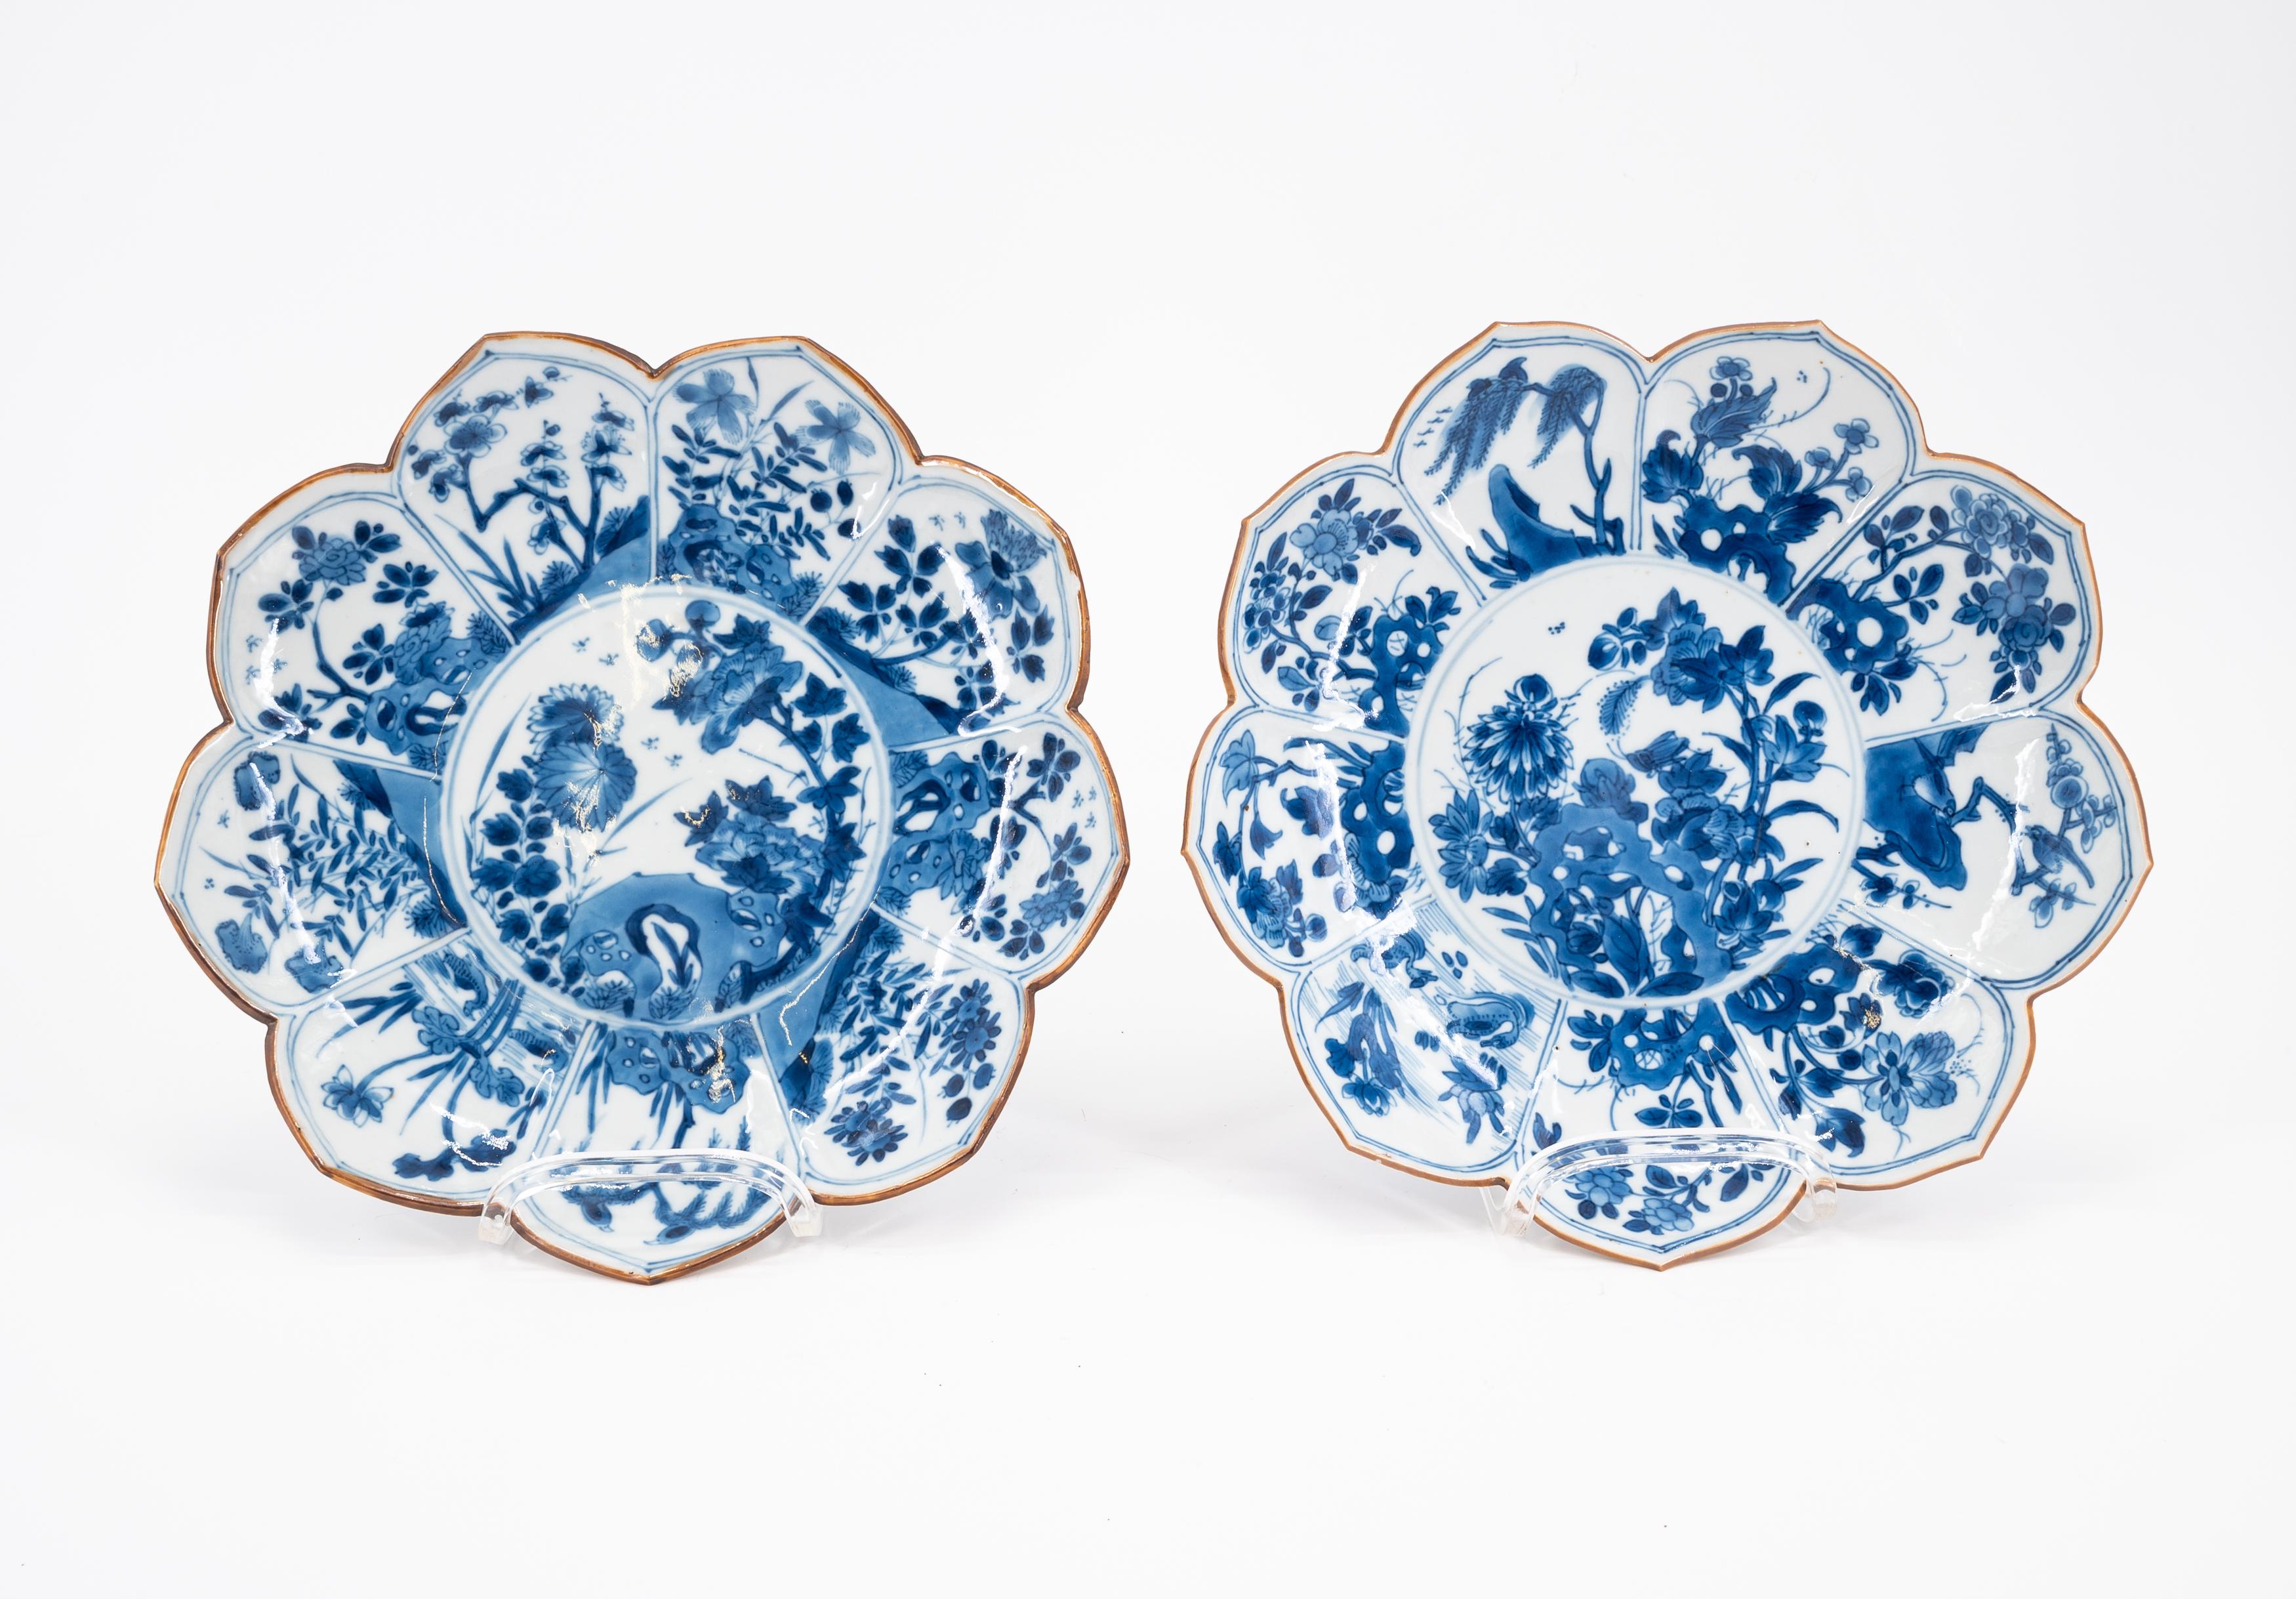 SUITE OF FOUR BLUE-WHITE PLATE WITH FLOWER-SHAPED RIM - Image 2 of 3